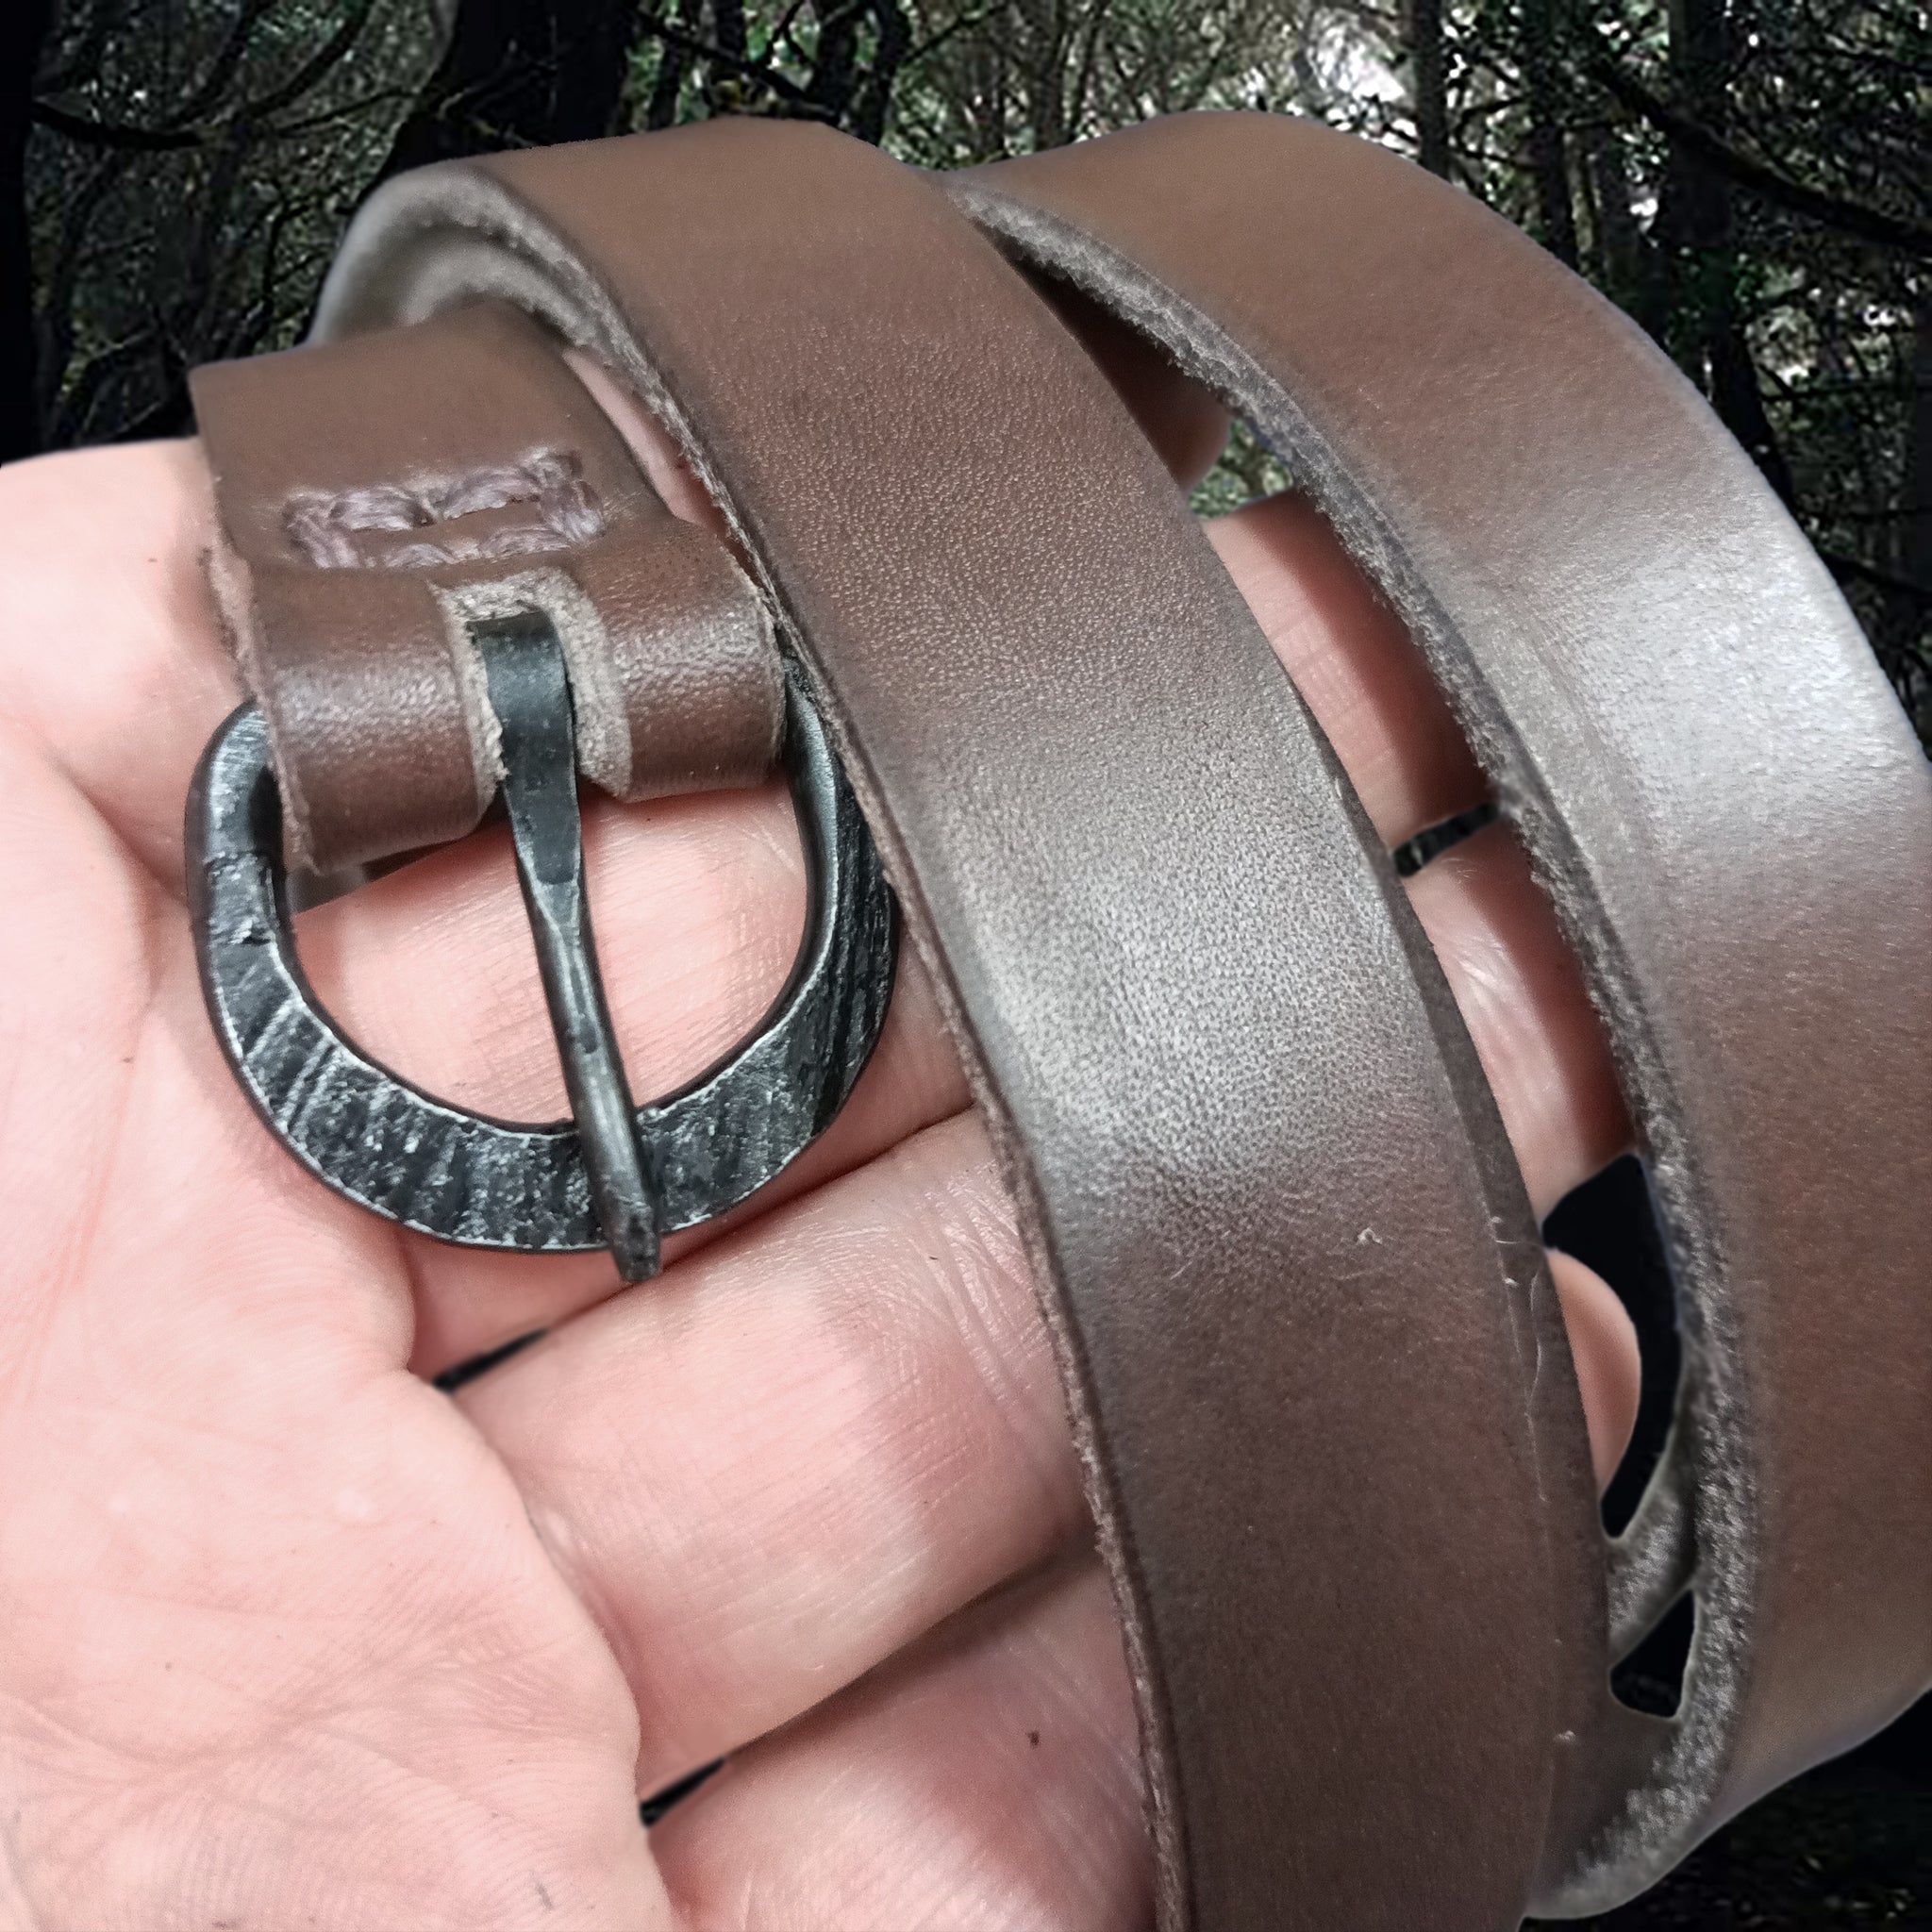 Hand-Forged Iron Viking / Medieval Buckle - 20mm (0.75 inch) on Brown Leather Belt on Hand